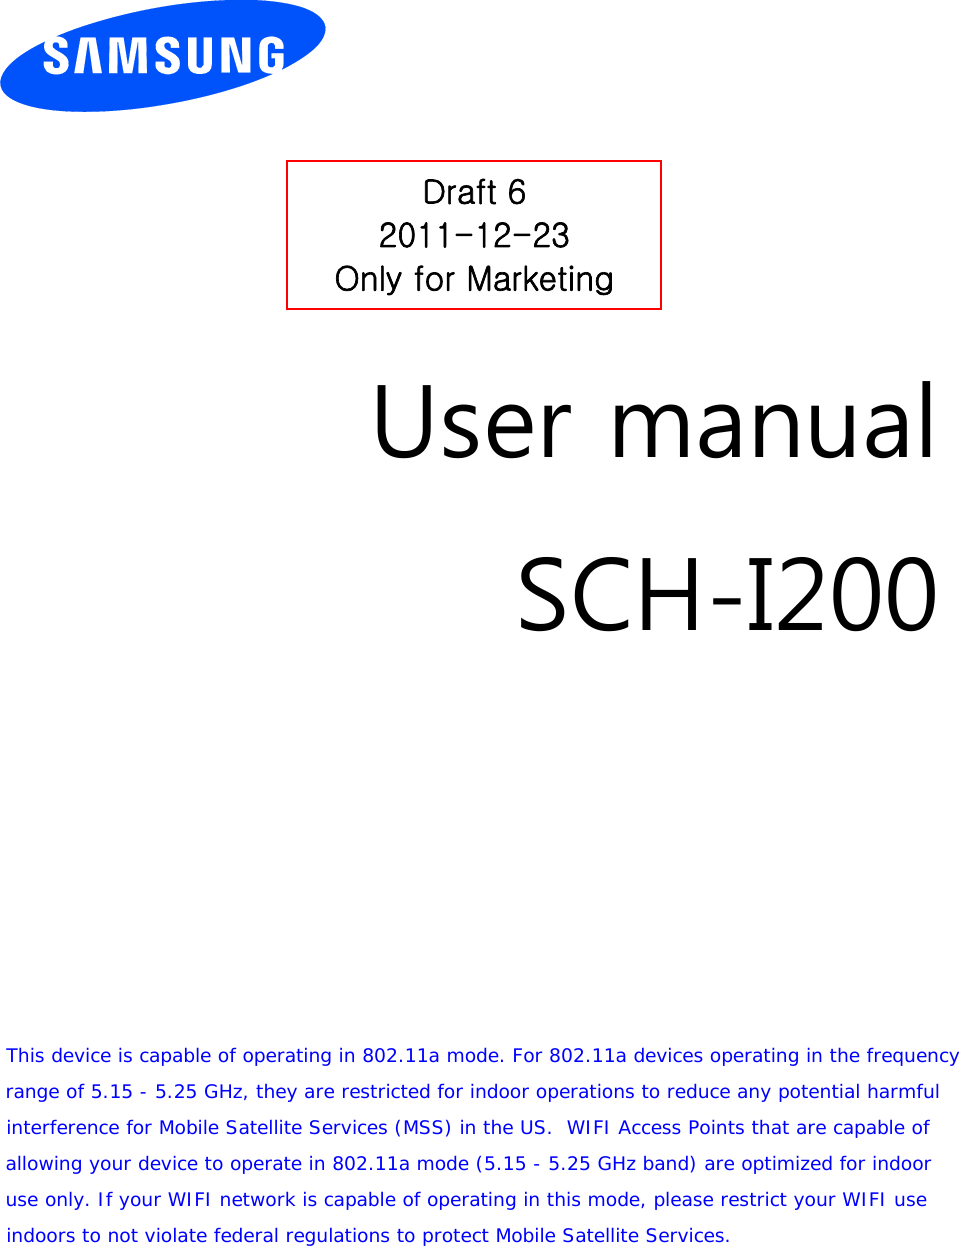         User manual SCH-I200            This device is capable of operating in 802.11a mode. For 802.11a devices operating in the frequency range of 5.15 - 5.25 GHz, they are restricted for indoor operations to reduce any potential harmful interference for Mobile Satellite Services (MSS) in the US.  WIFI Access Points that are capable of allowing your device to operate in 802.11a mode (5.15 - 5.25 GHz band) are optimized for indoor use only. If your WIFI network is capable of operating in this mode, please restrict your WIFI use  indoors to not violate federal regulations to protect Mobile Satellite Services.   Draft 6 2011-12-23 Only for Marketing 